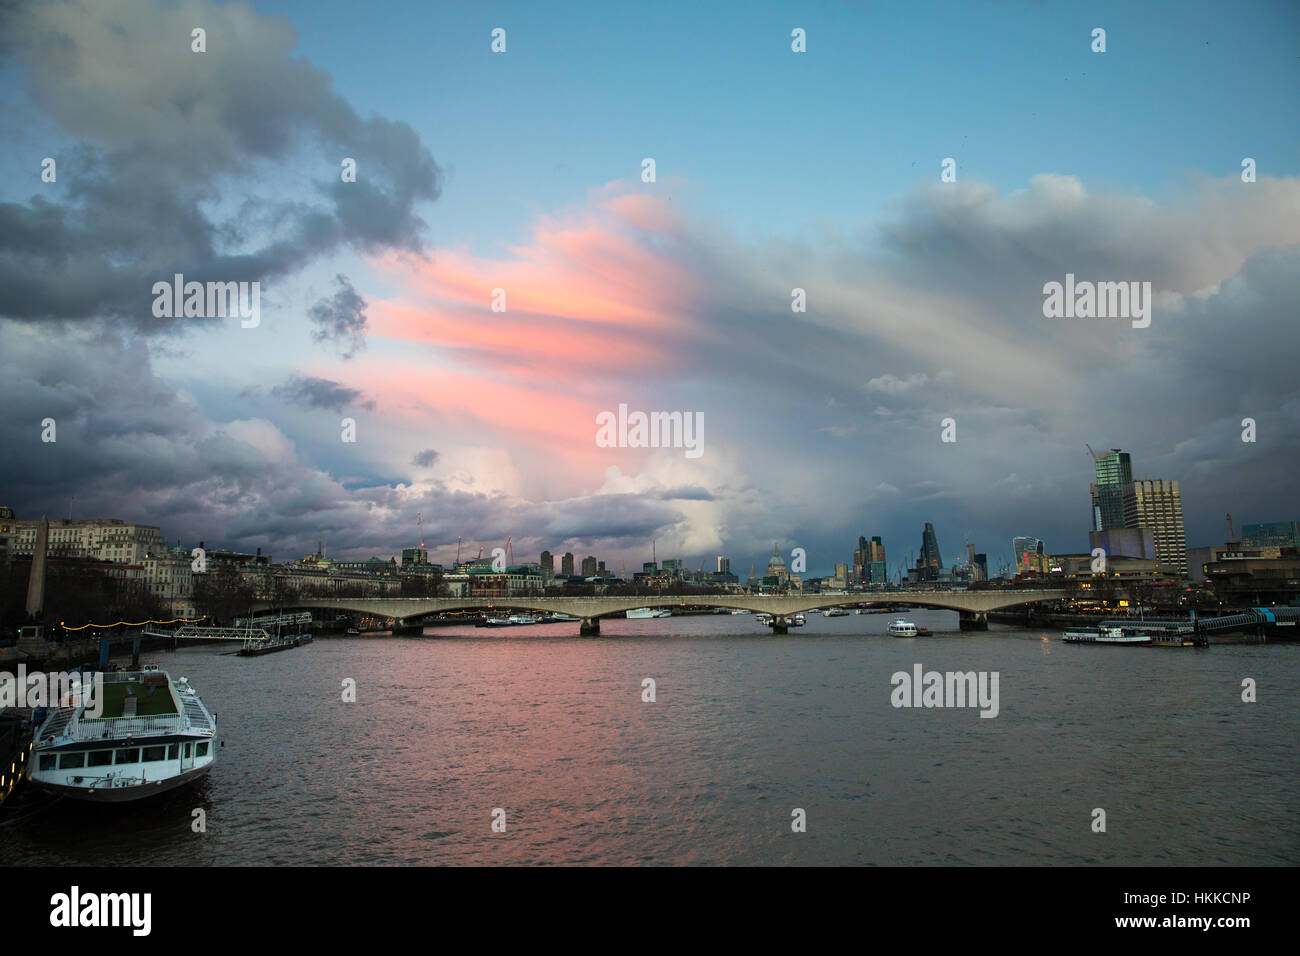 London, UK. 28th January, 2017. Beautiful evening view over Waterloo Bridge, seen from Charing Cross, with pink clouds at sunset. Credit: Carol Moir/Alamy Live News. Stock Photo